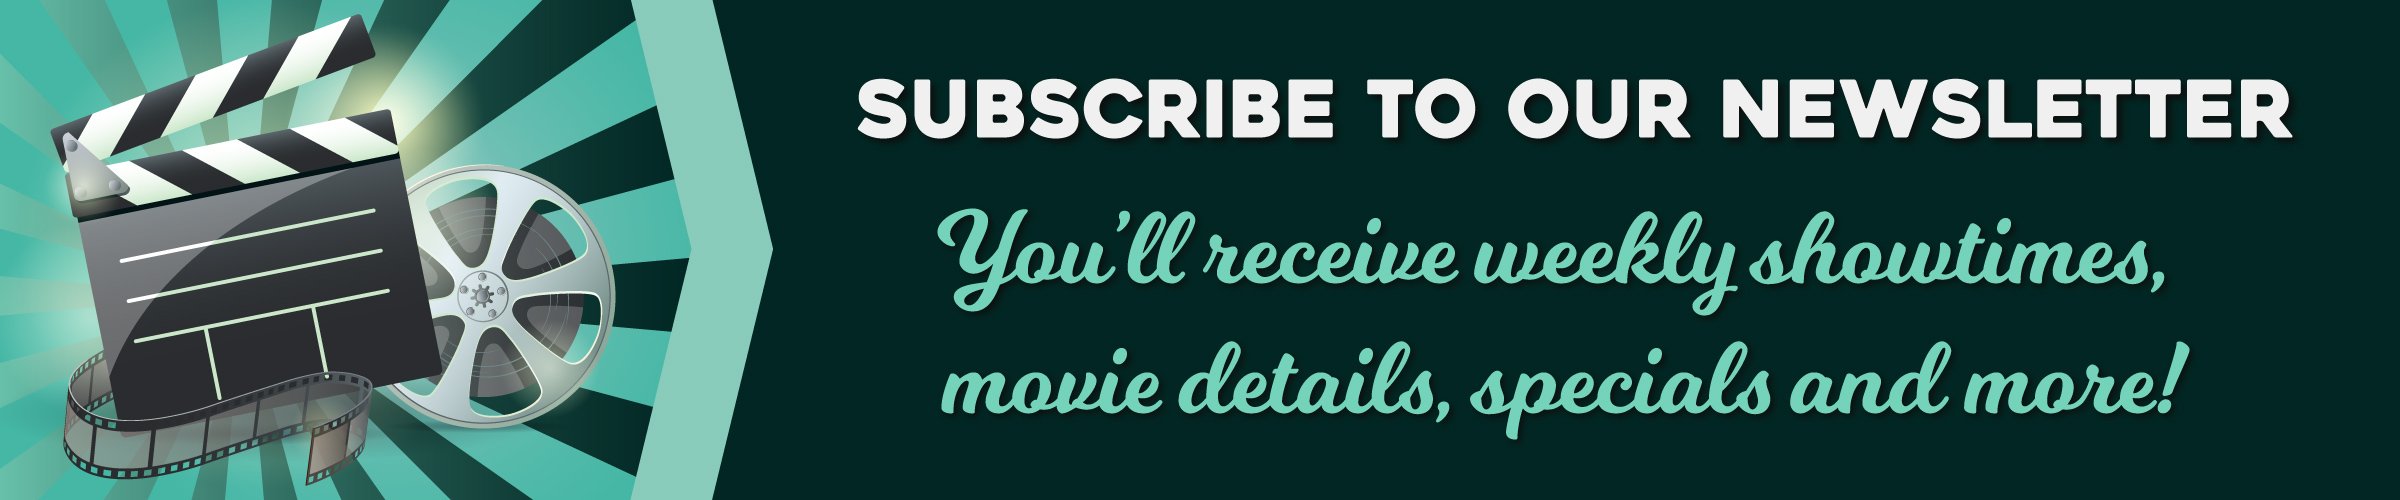 subscribe to our newsletter for weekly showtimes, movie details, specials and more!